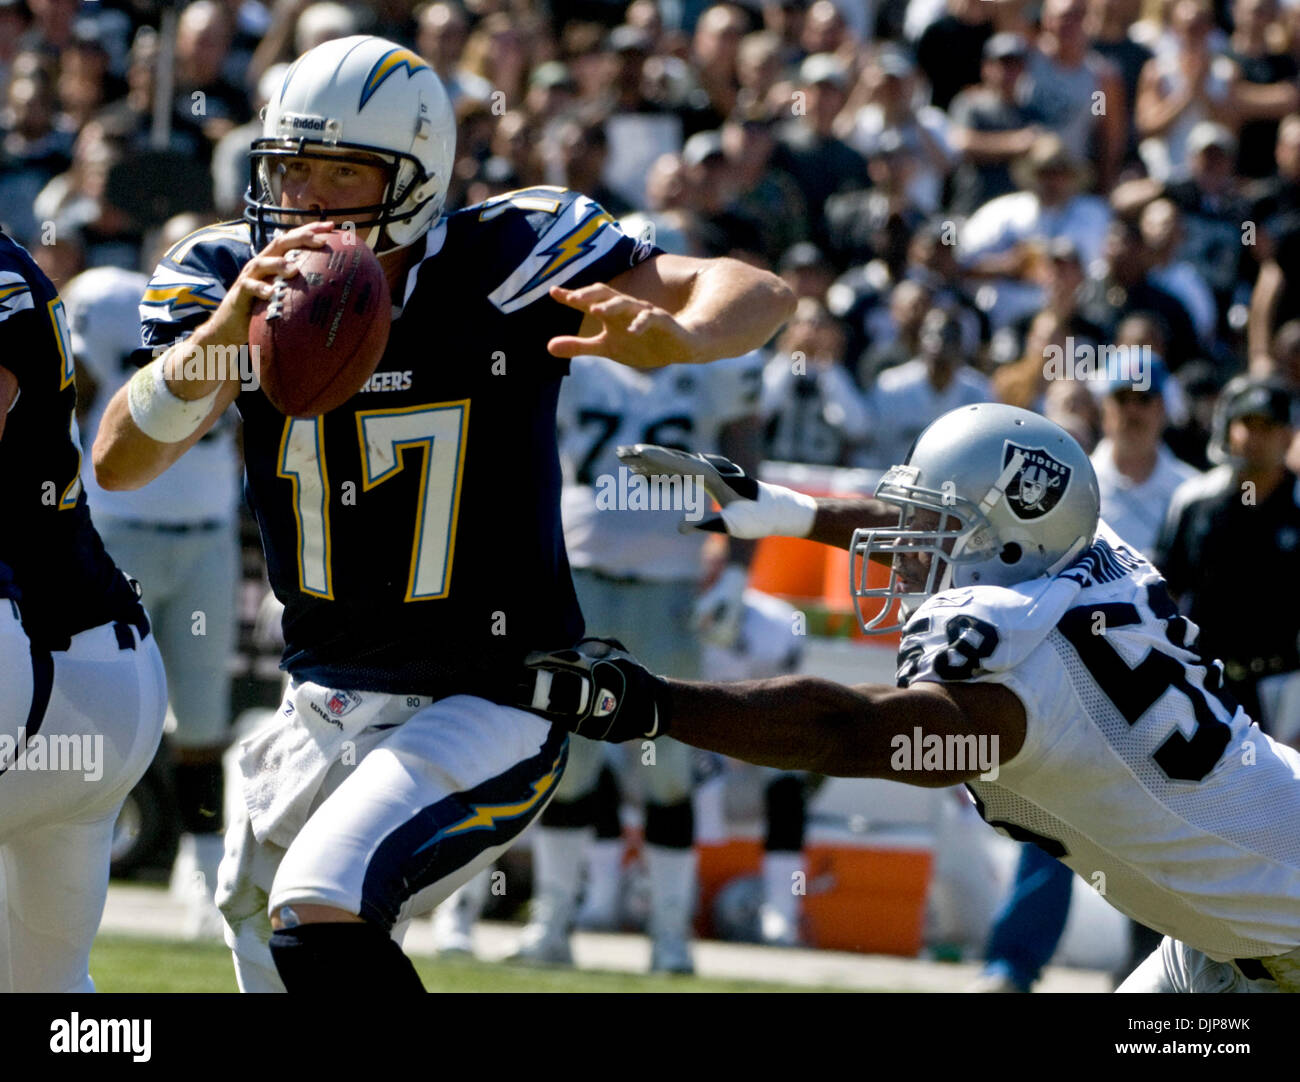 Sep 28, 2008 - OAKLAND, CA, USA - Oakland Raiders defensive end KALIMBA EDWARDS #58 forces San Diego Chargers quarterback PHILIP RIVERS #17 out of the pocket during a game at McAfee Coliseum. (Credit Image: © AL GOLUB/Golub Photography/Golub Photography) Stock Photo